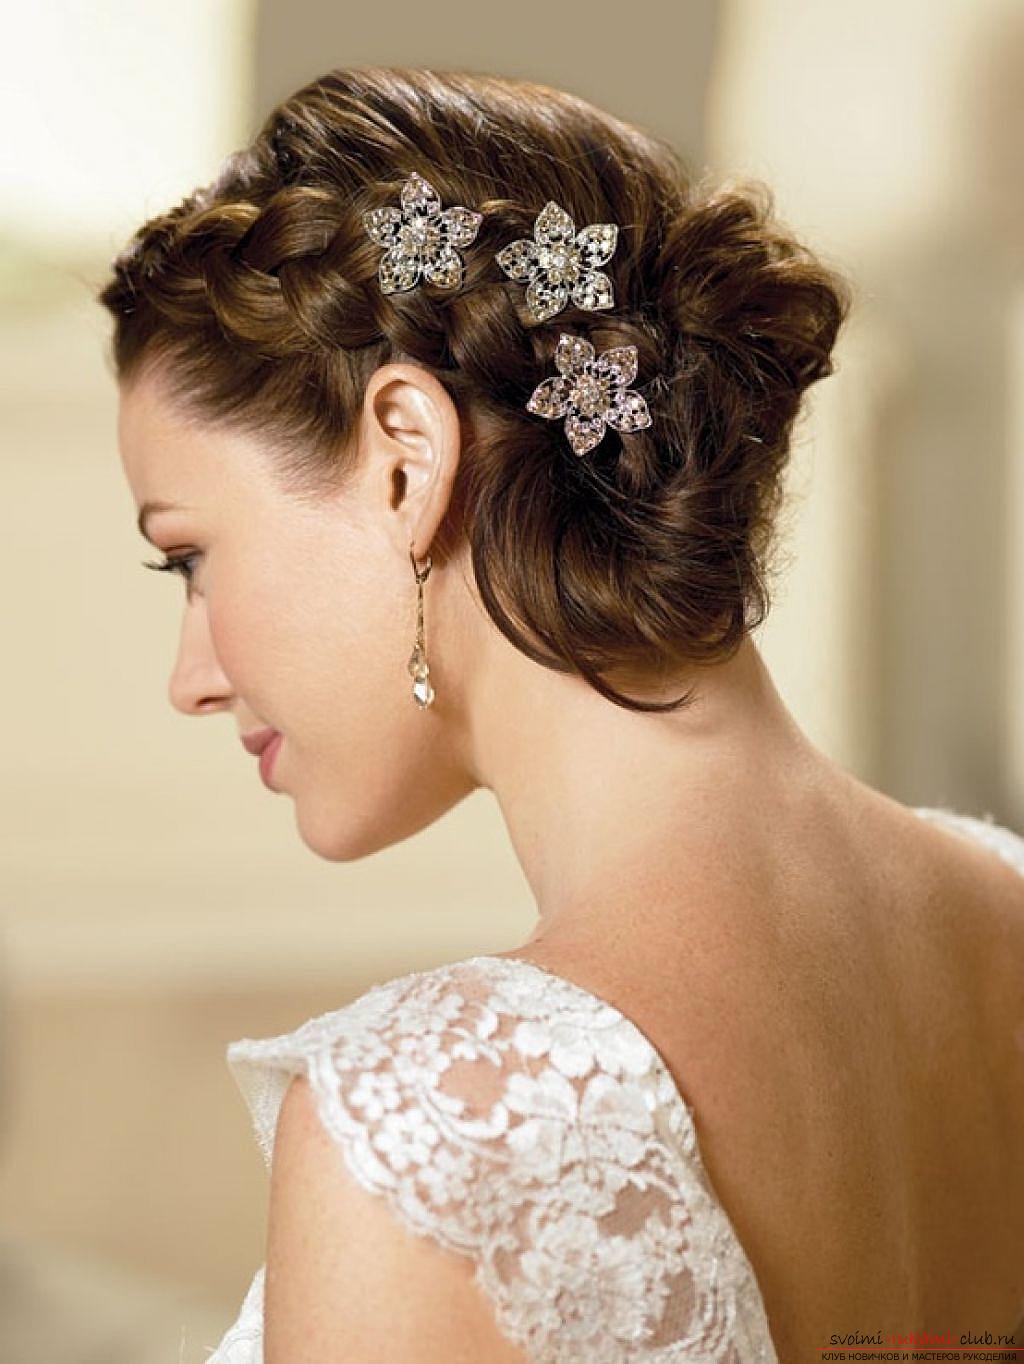 Photo gallery of wedding hairstyles for hair of different length. Photo №13